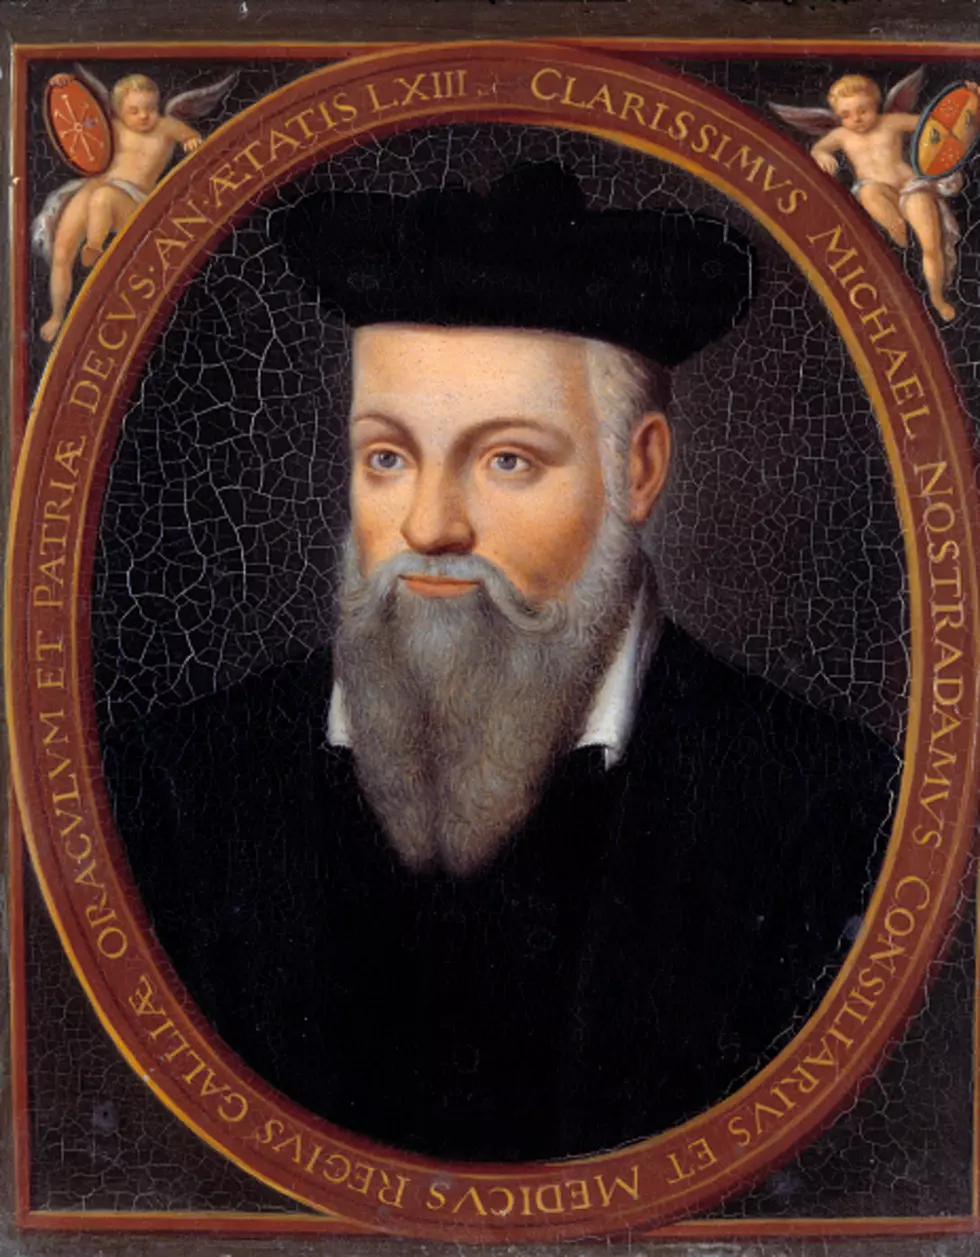 Did Nostradamus Predict the Results of the 2016 Presidential Election?